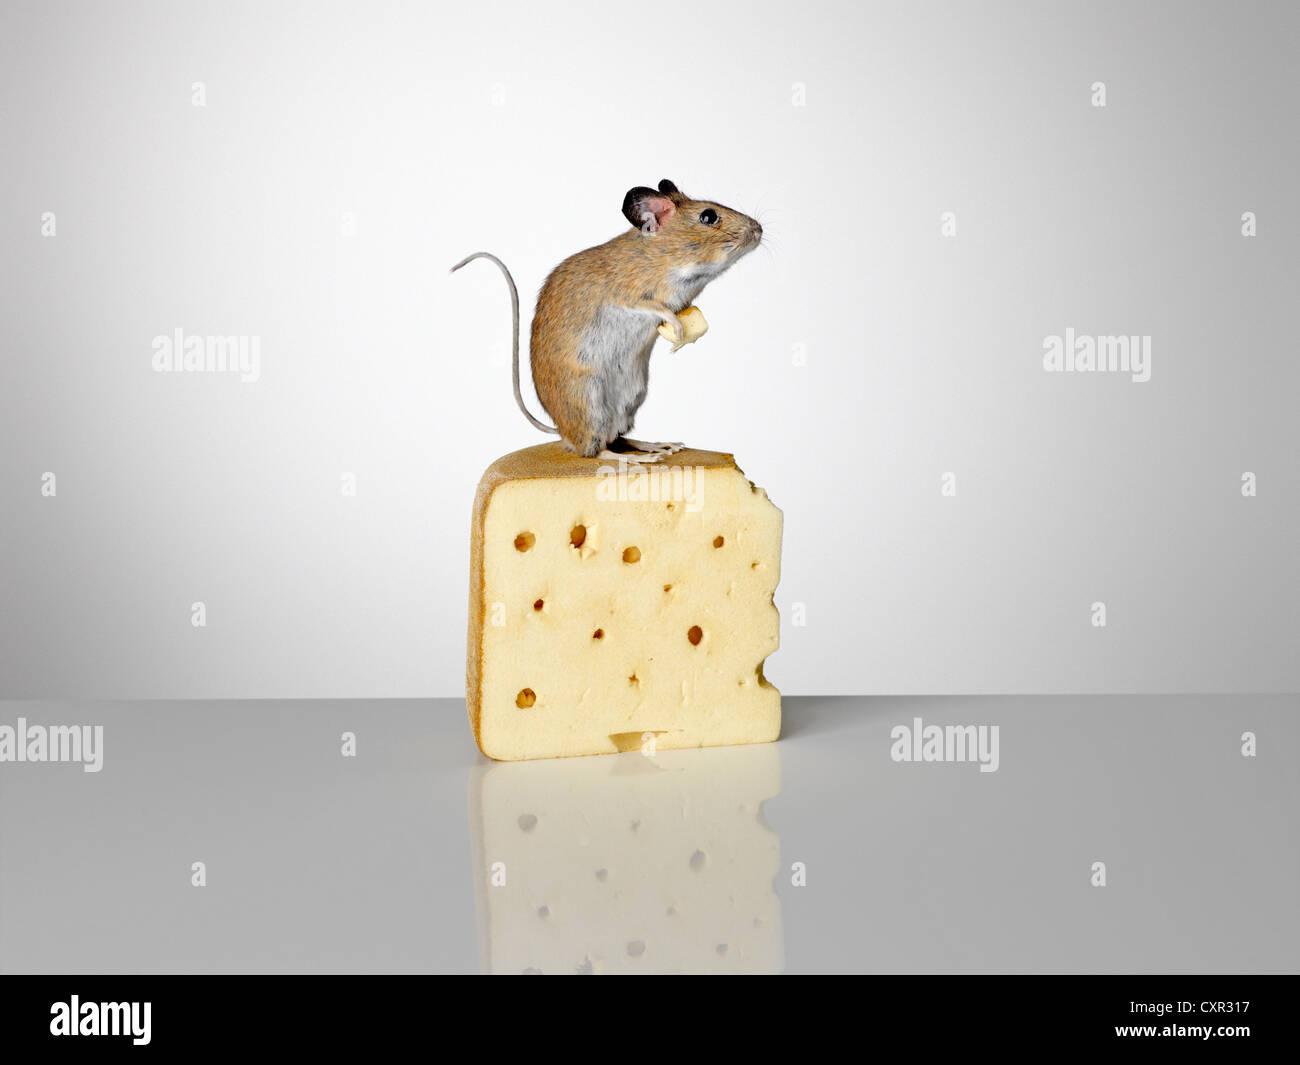 Mouse standing on a piece of cheese Stock Photo